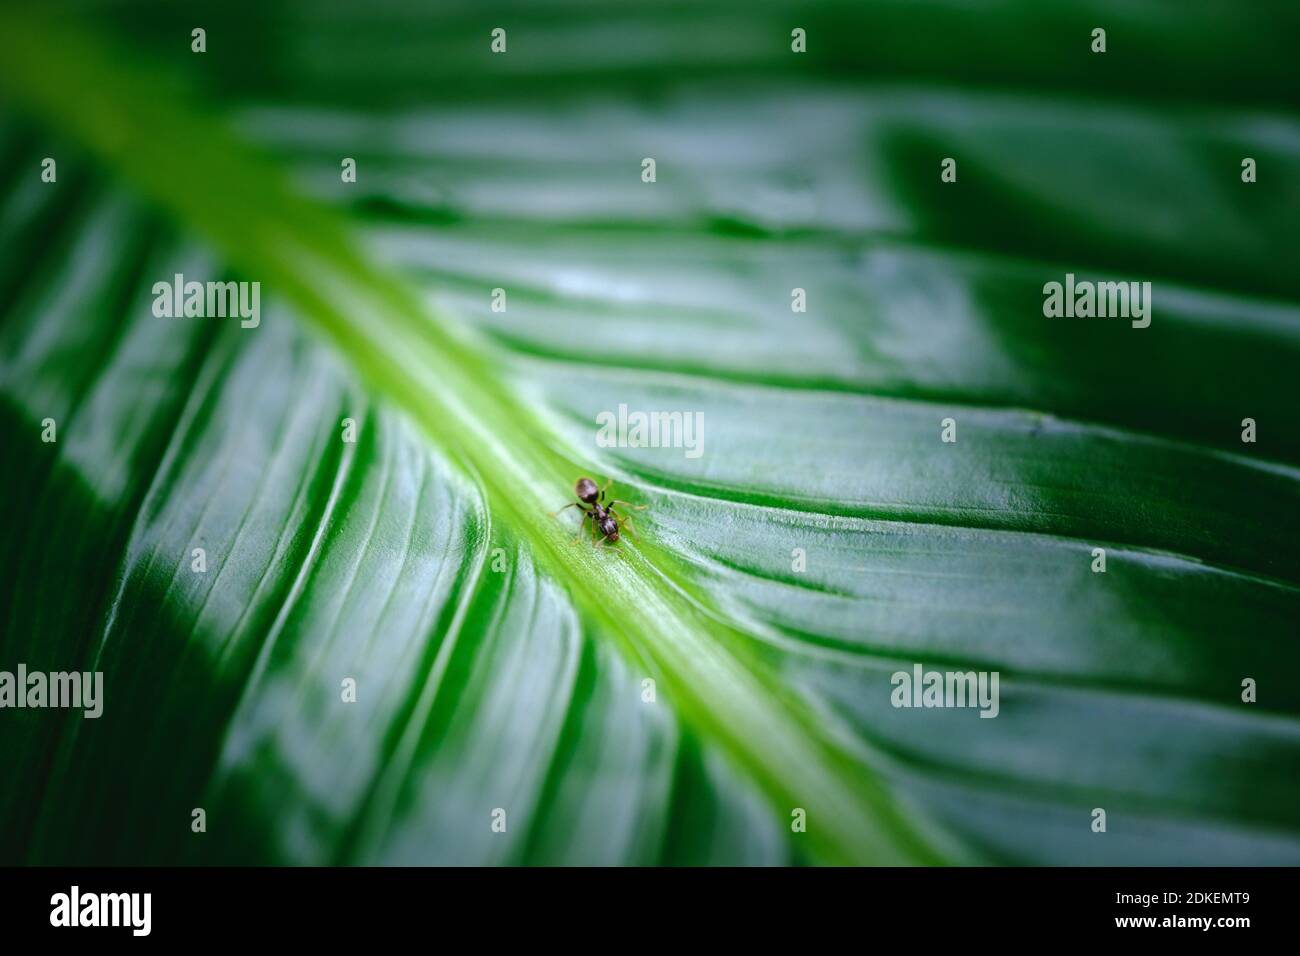 Small ant in the middle of the leaf stem filling the frame Stock Photo